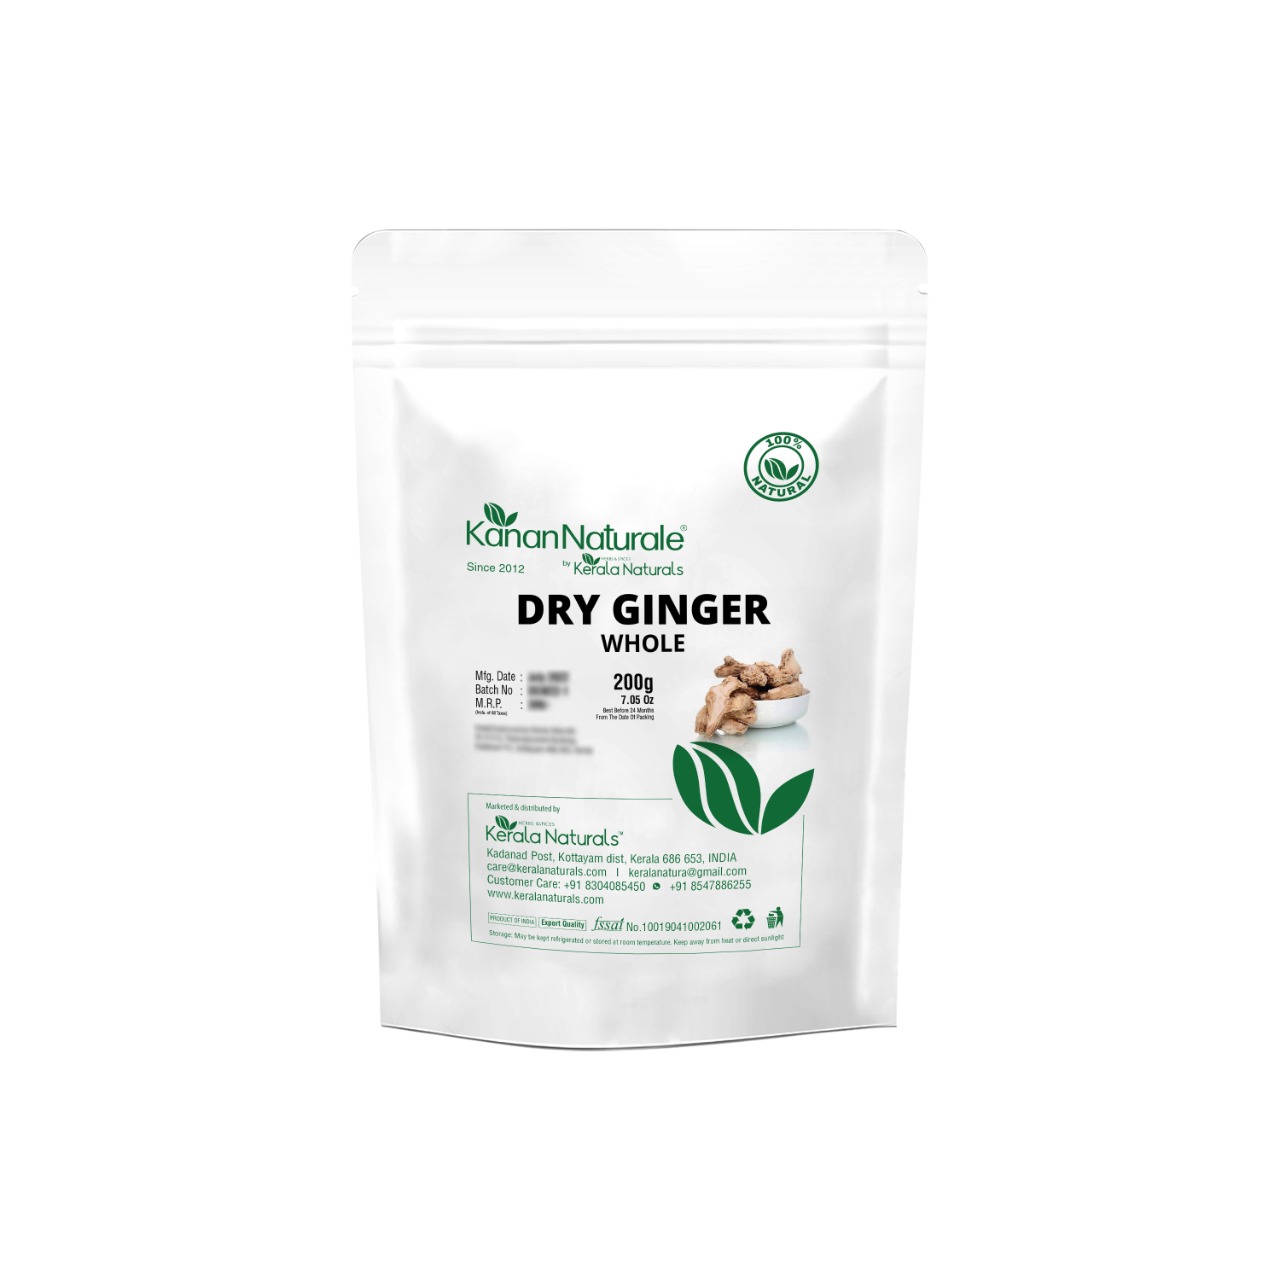 Buy Kanan Naturale Dry Ginger Whole at Best Price Online